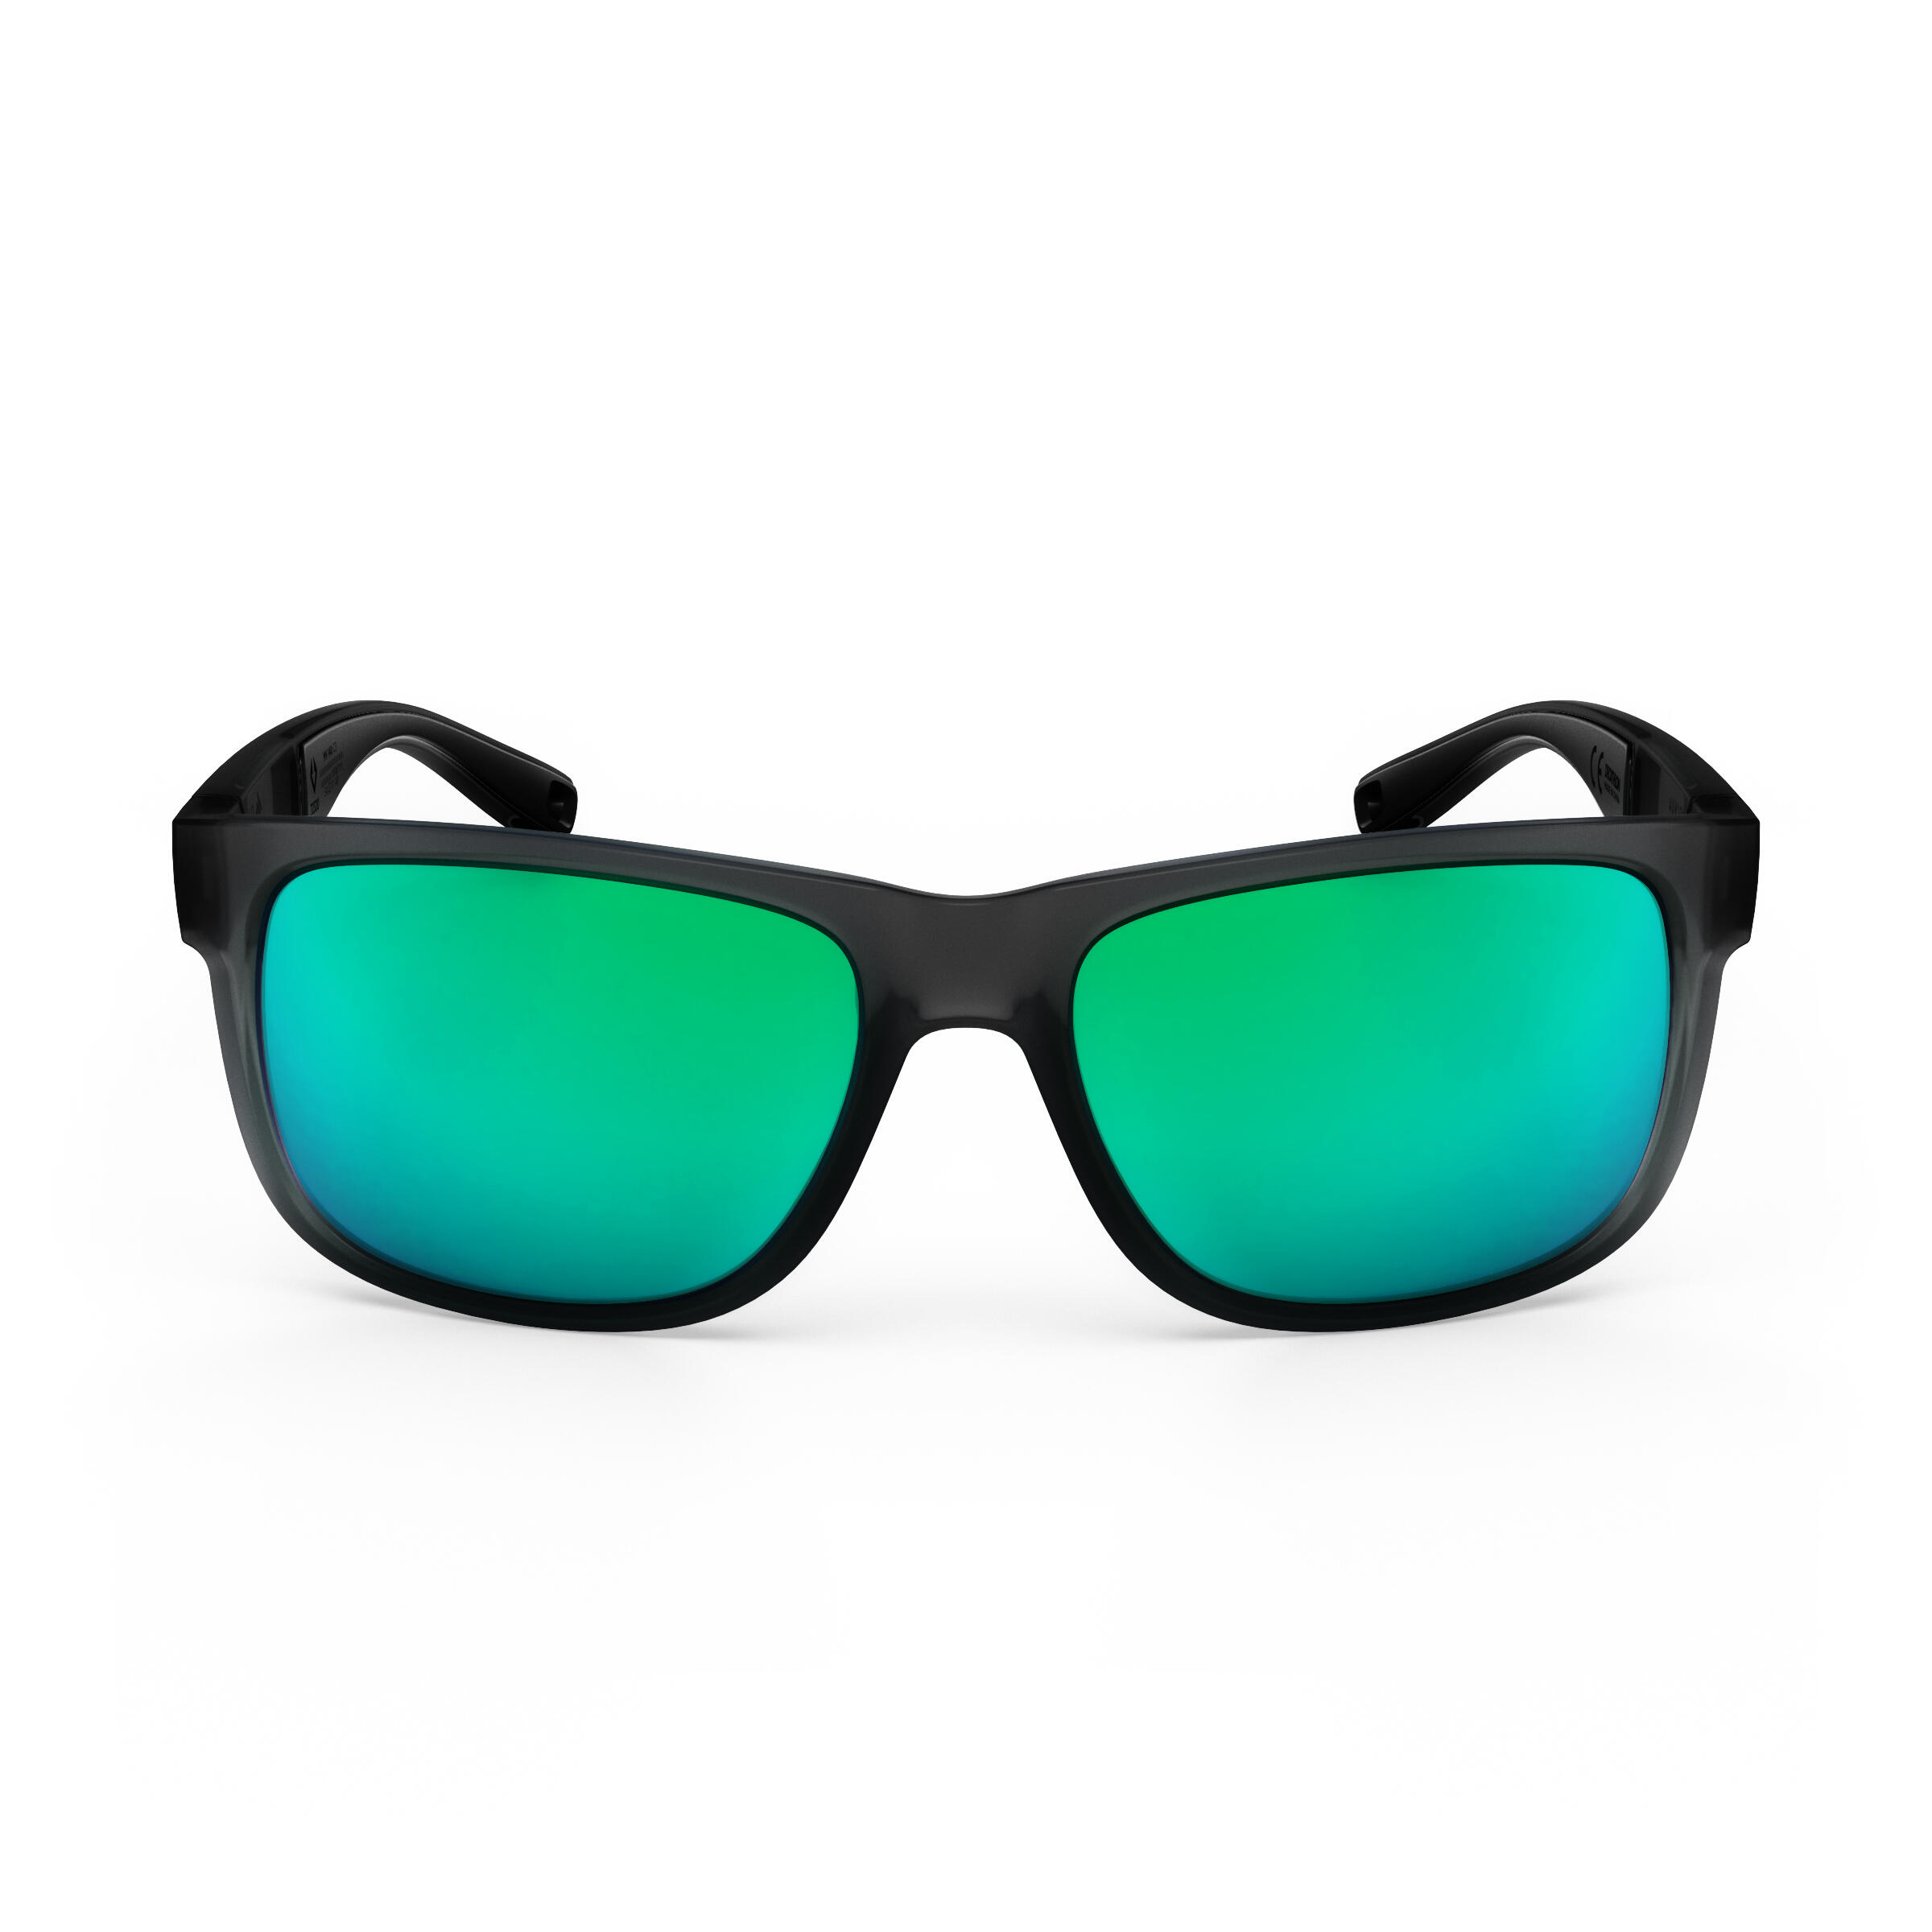 Quechua By Decathlon Unisex Rectangle MHT500 Cat 4 Sunglasses 8558072 Price  in India, Full Specifications & Offers | DTashion.com